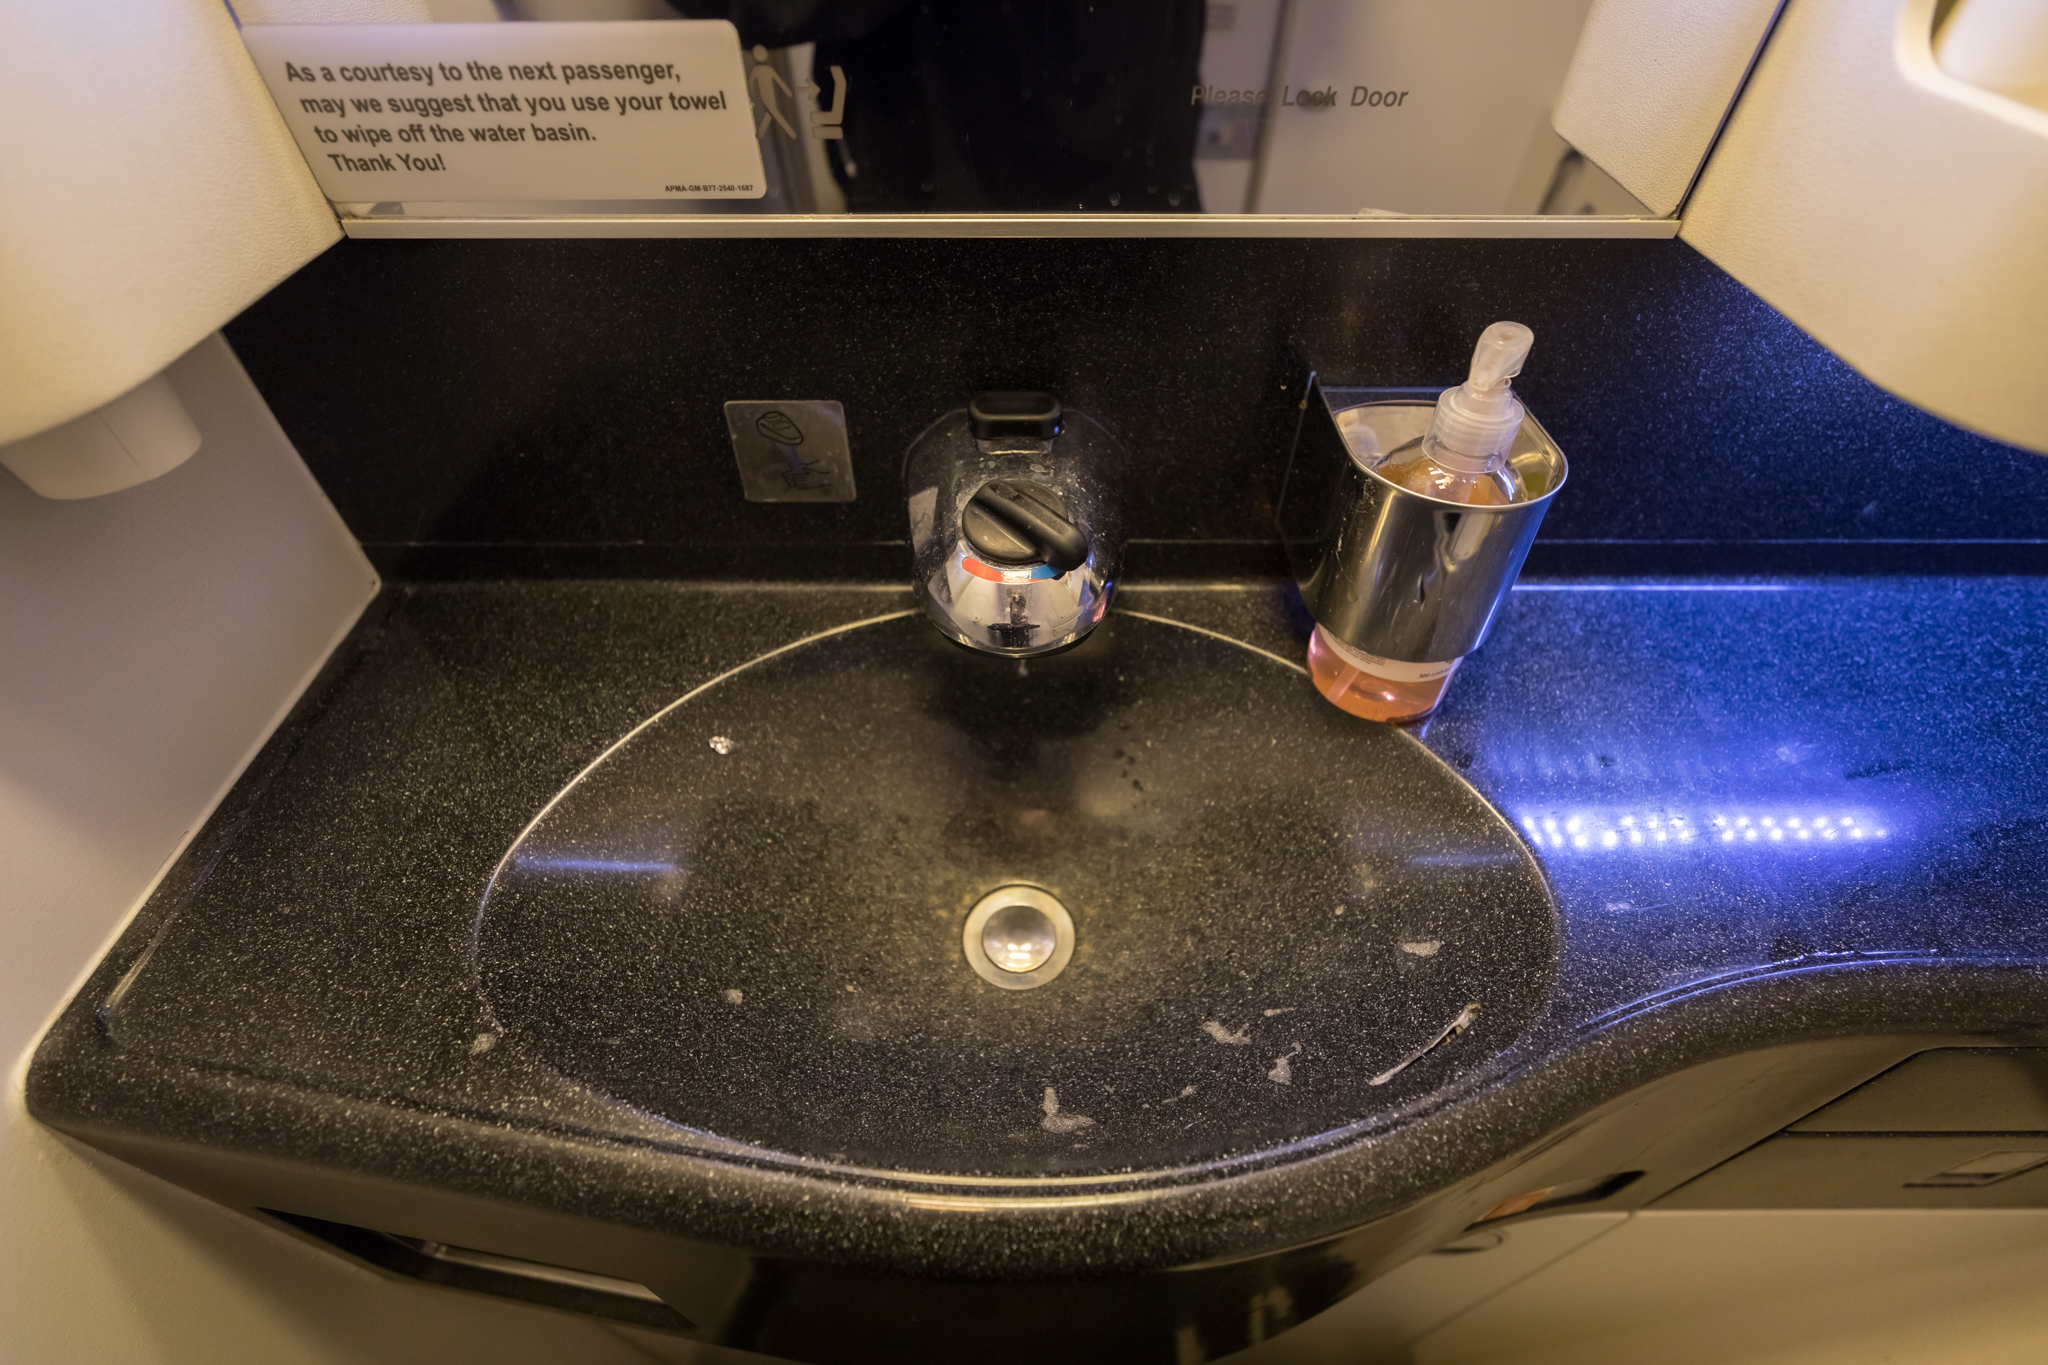 a sink with soap dispenser and a sign